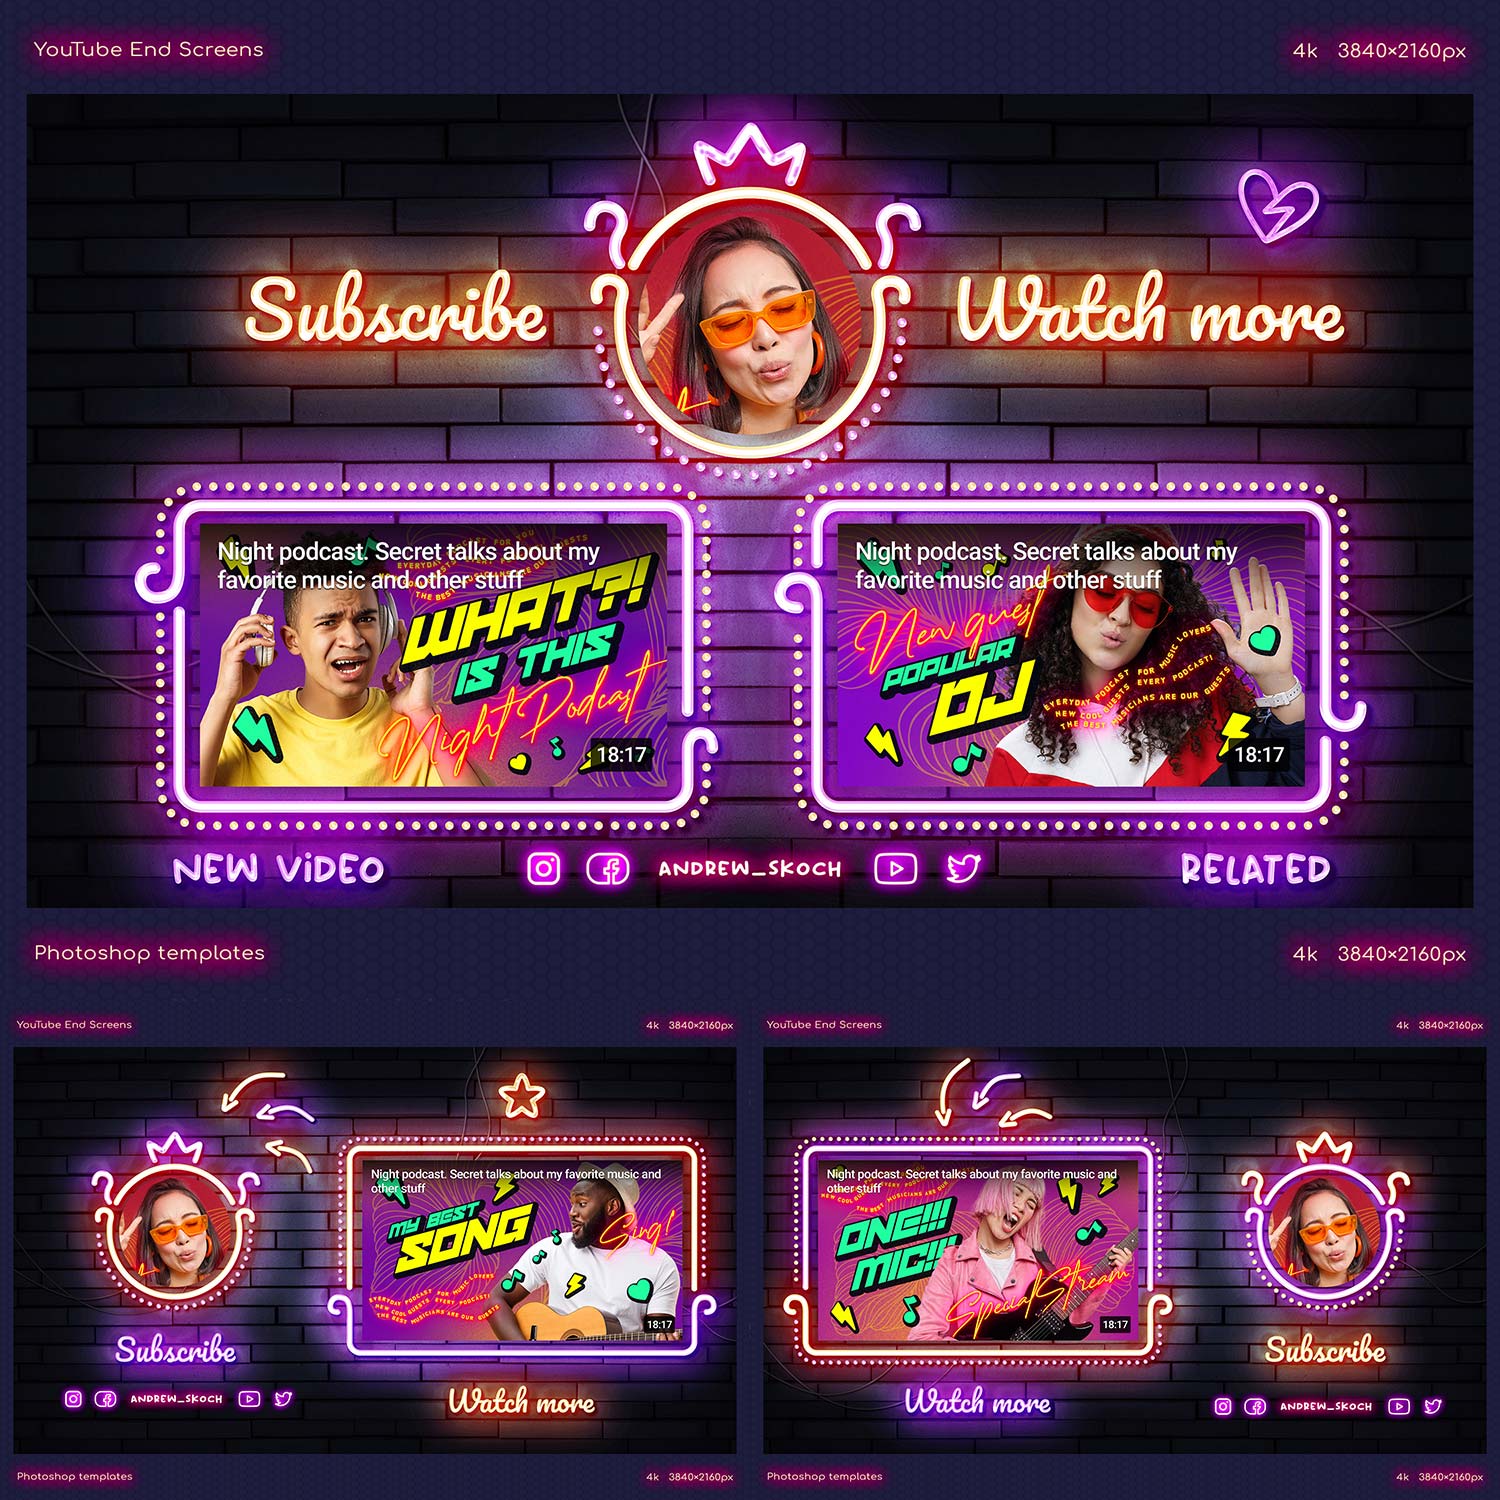 Neon YouTube End Screens preview image.